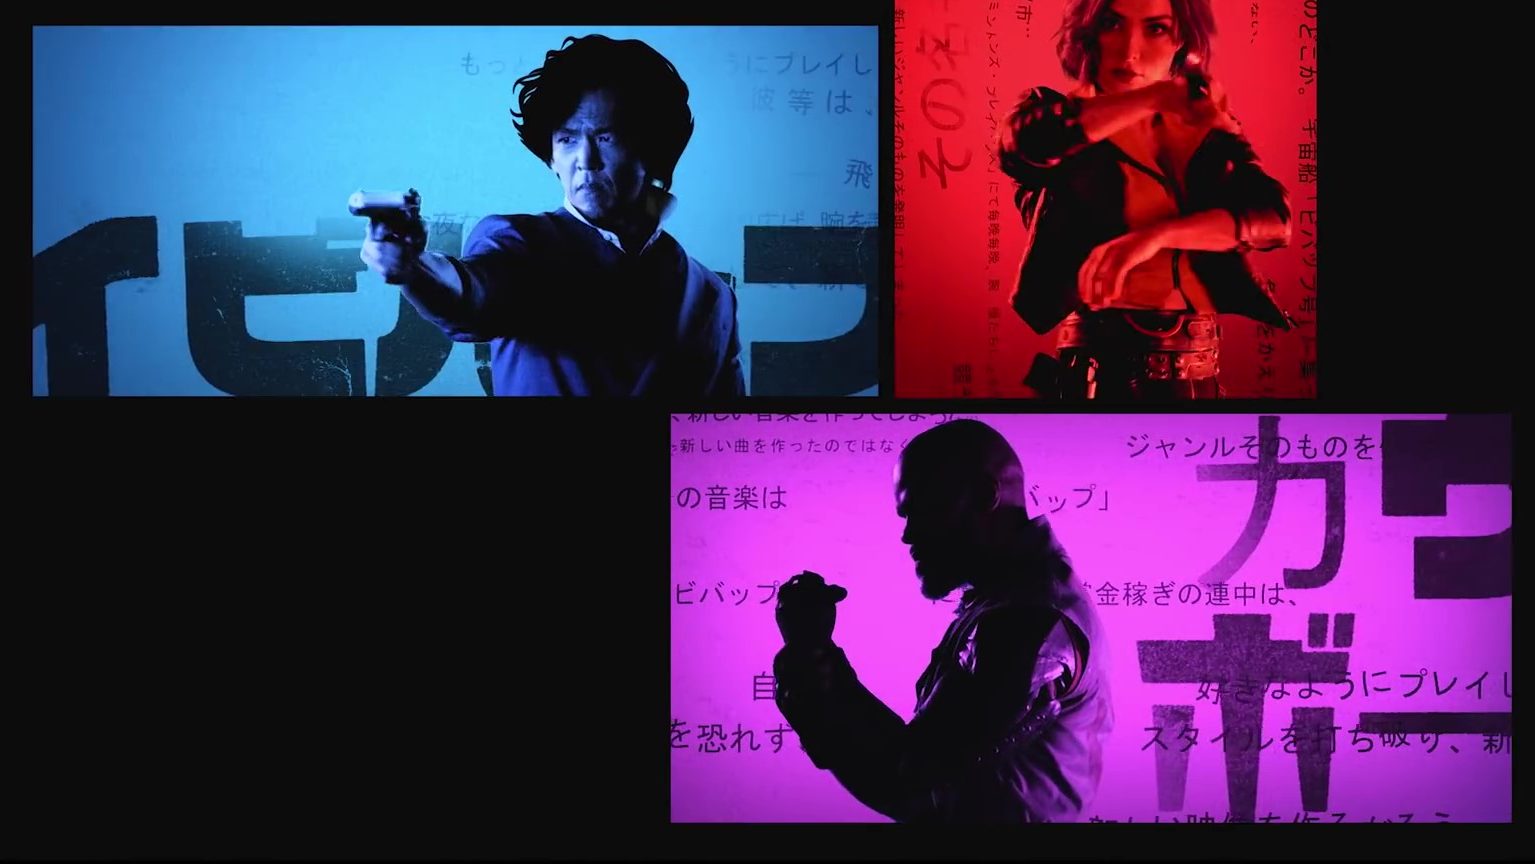 Watch The Opening Sequence For The Netflix Series COWBOY BEBOP